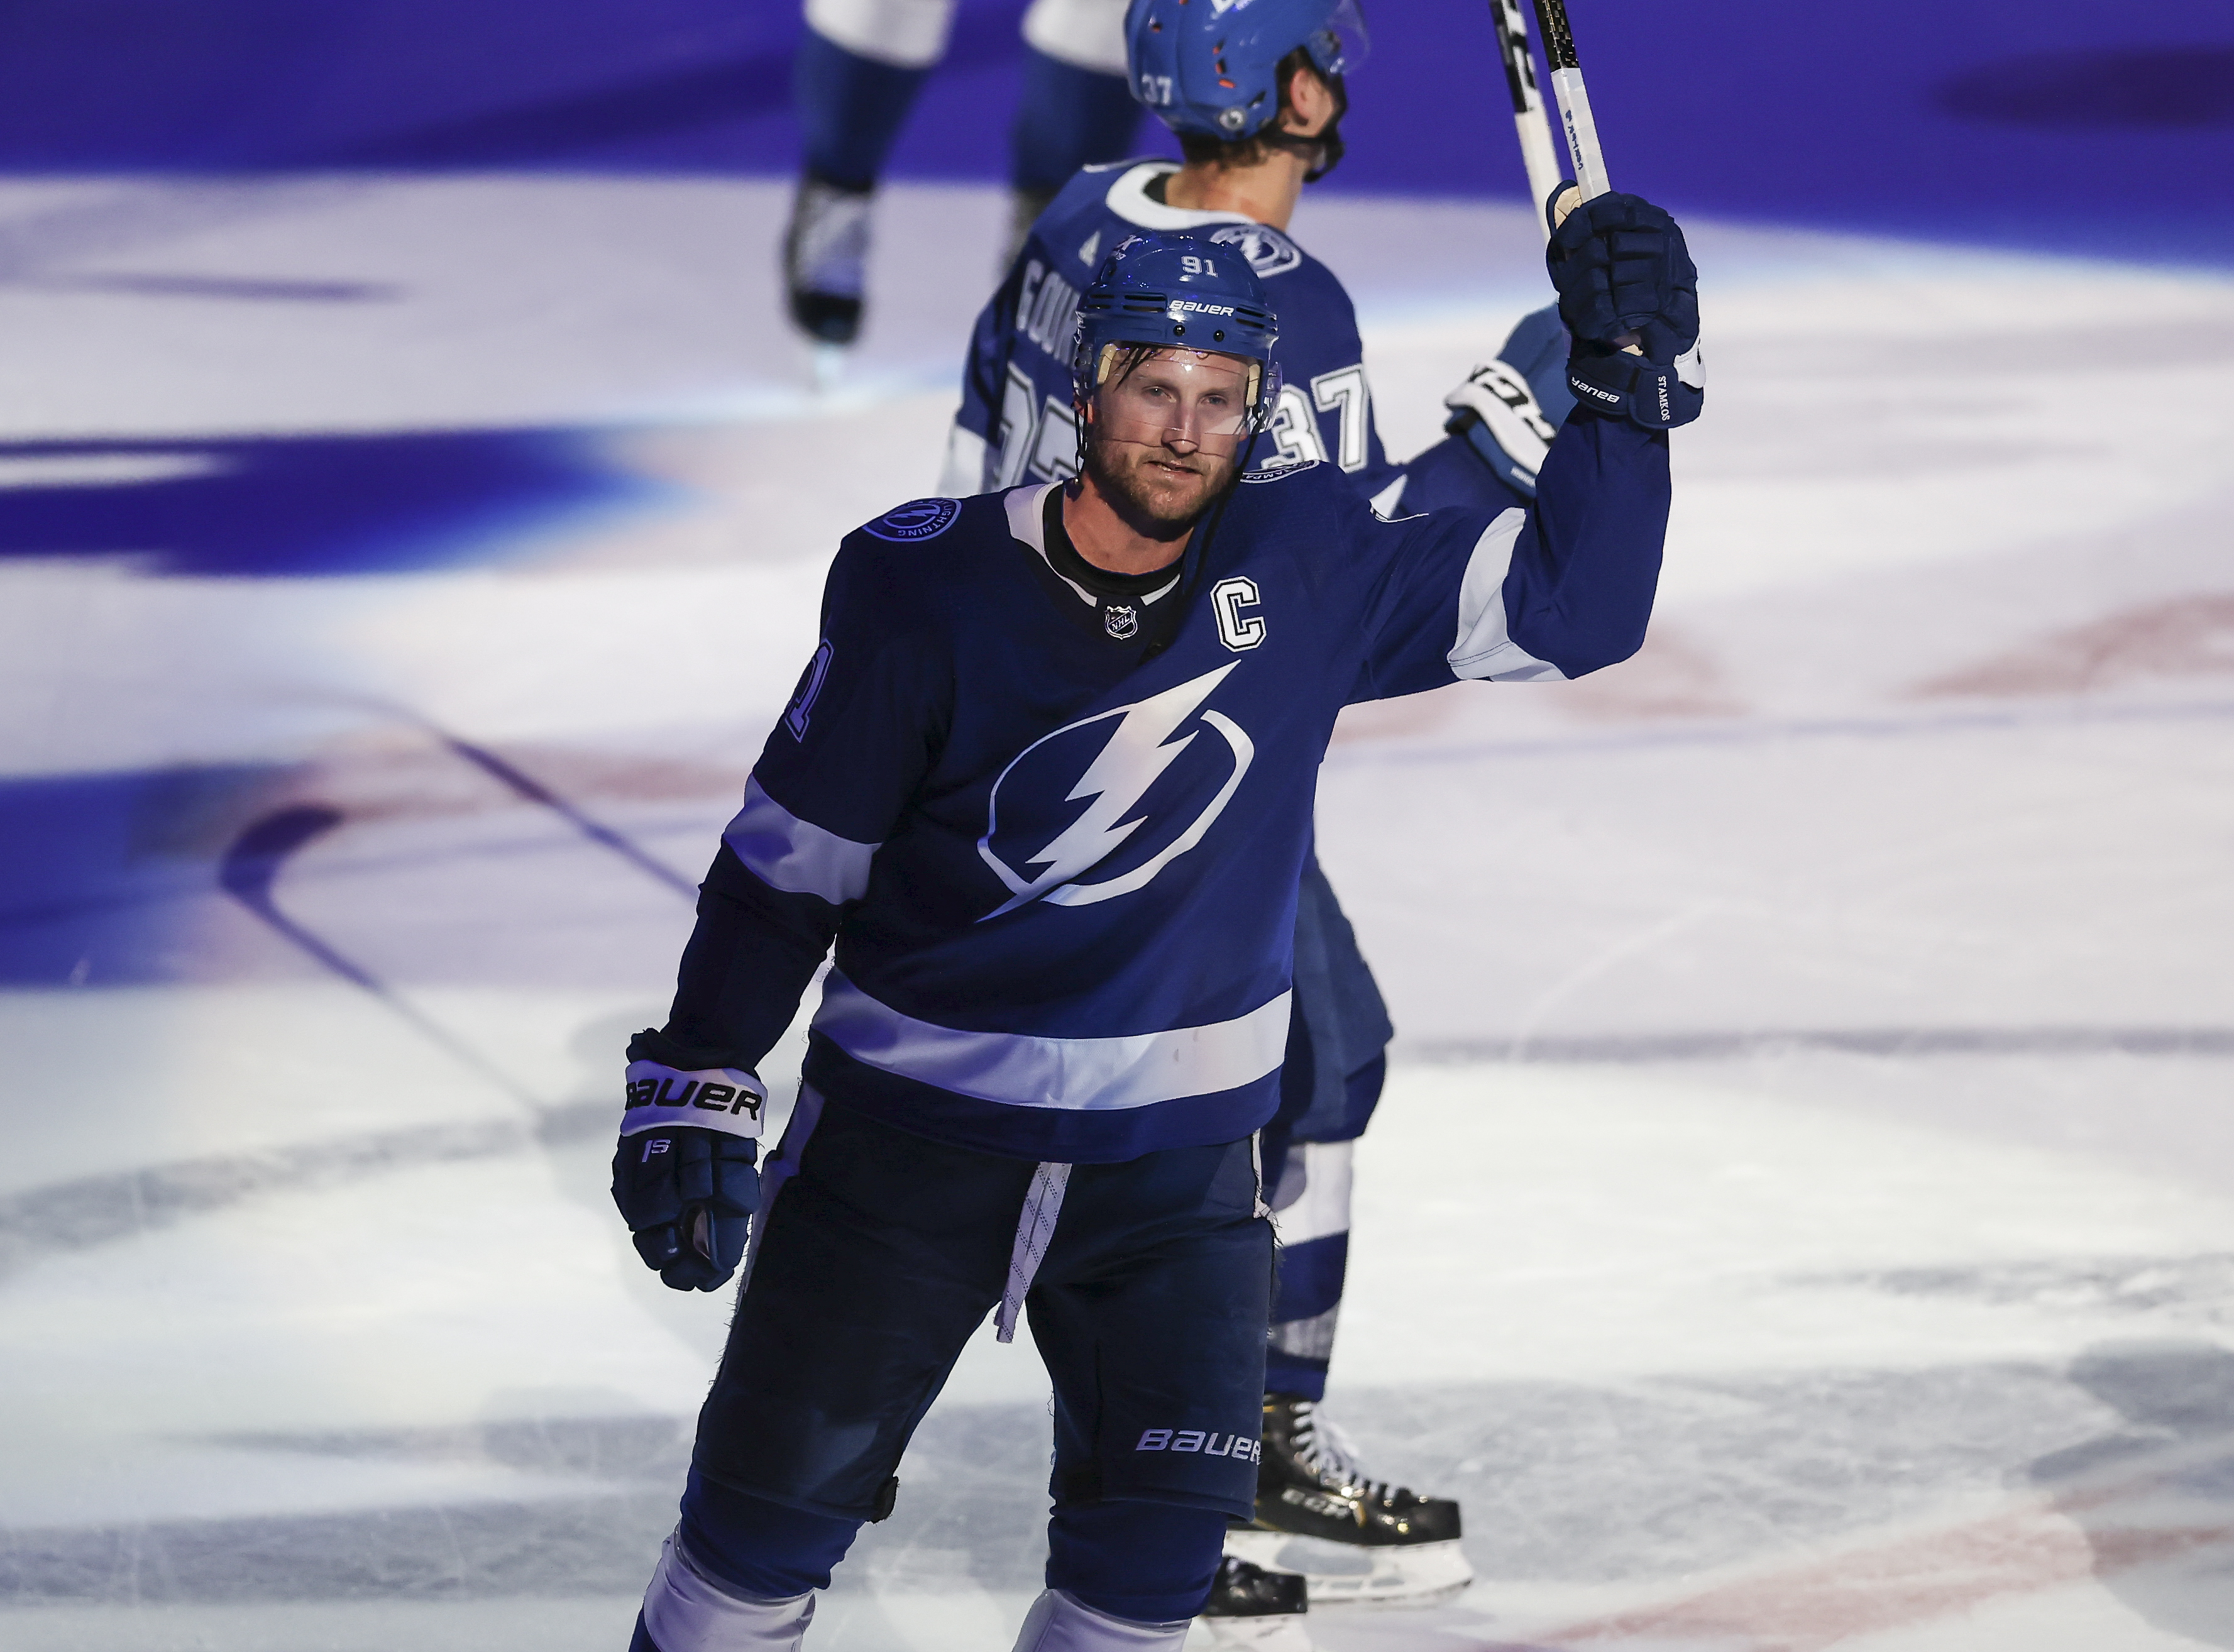 NHL: MAY 26 Stanley Cup Playoffs First Round - Panthers at Lightning